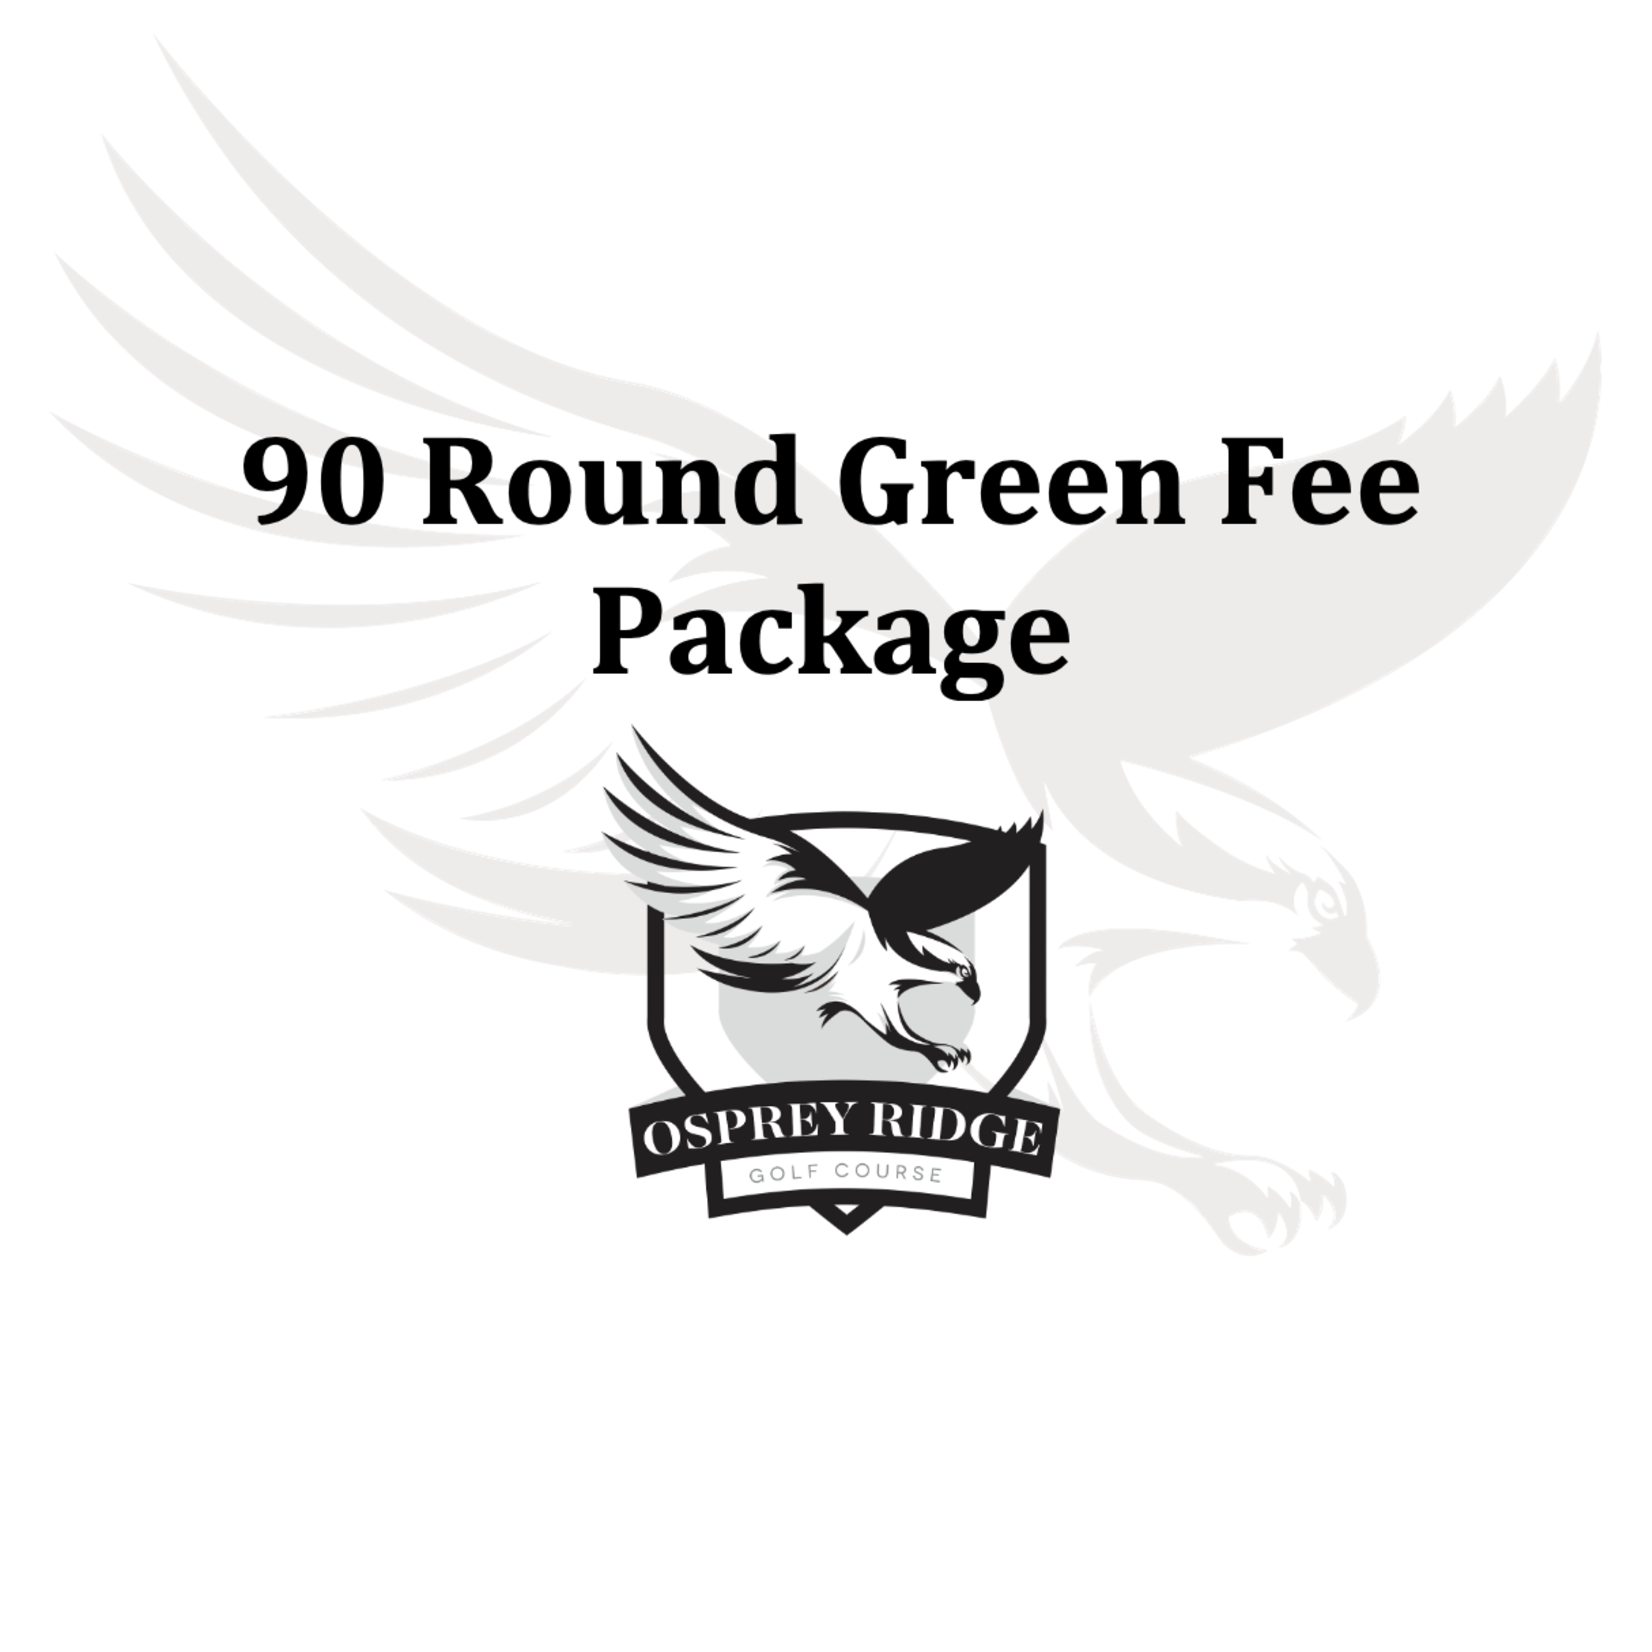 90 Round Green Fee Package